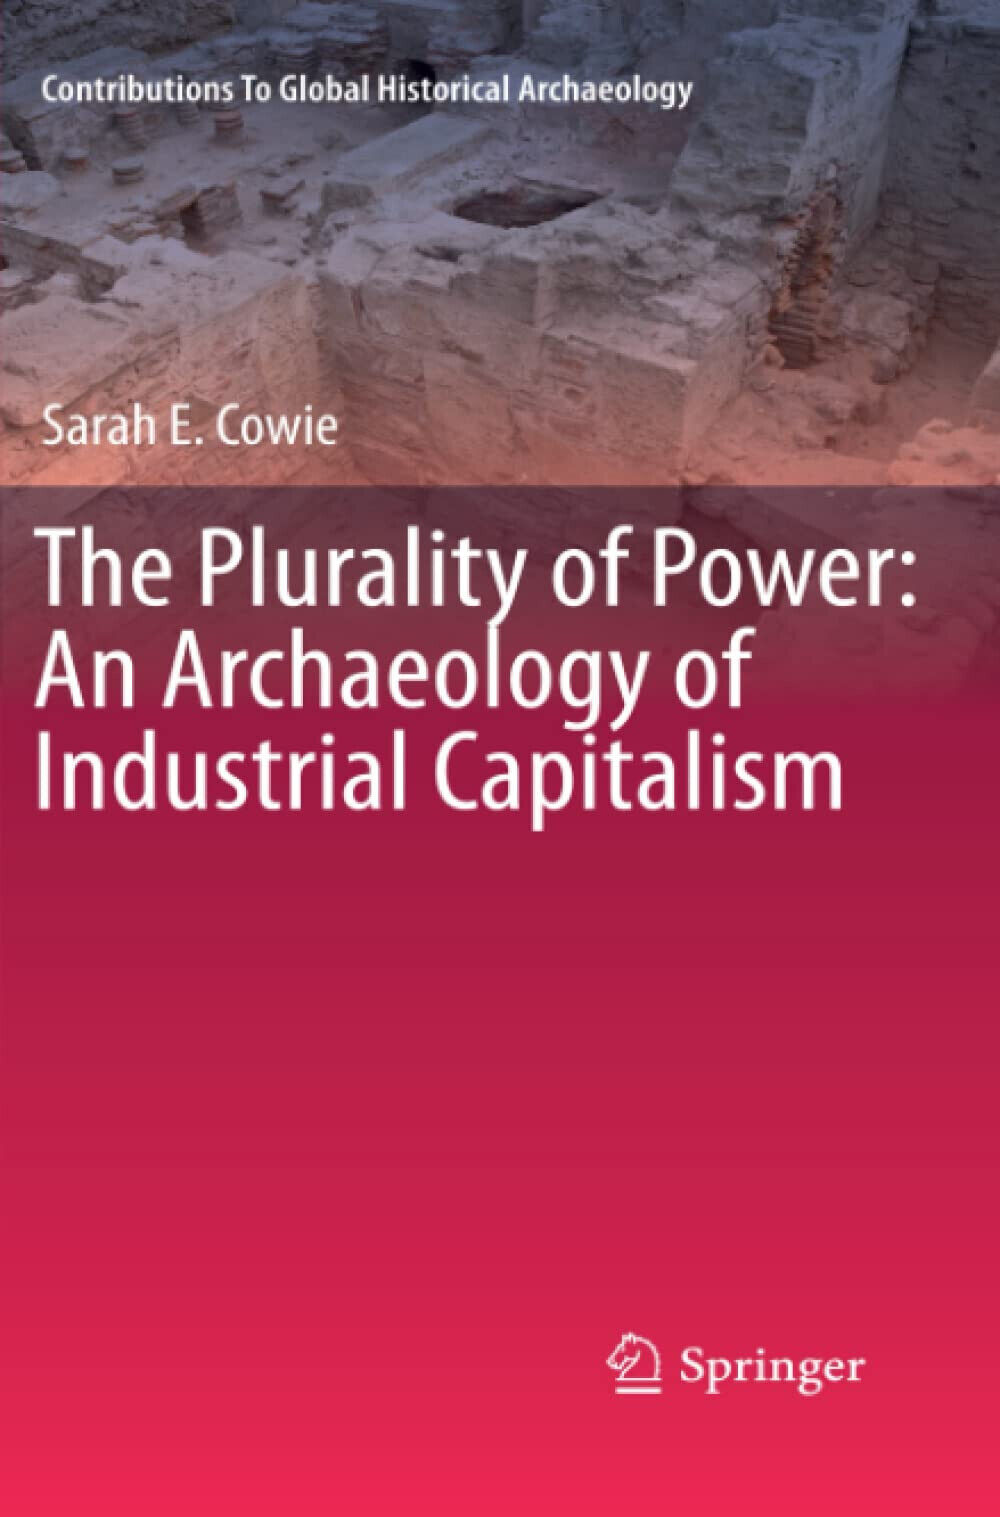 The Plurality of Power - Sarah Cowie - Springer, 2013 libro usato